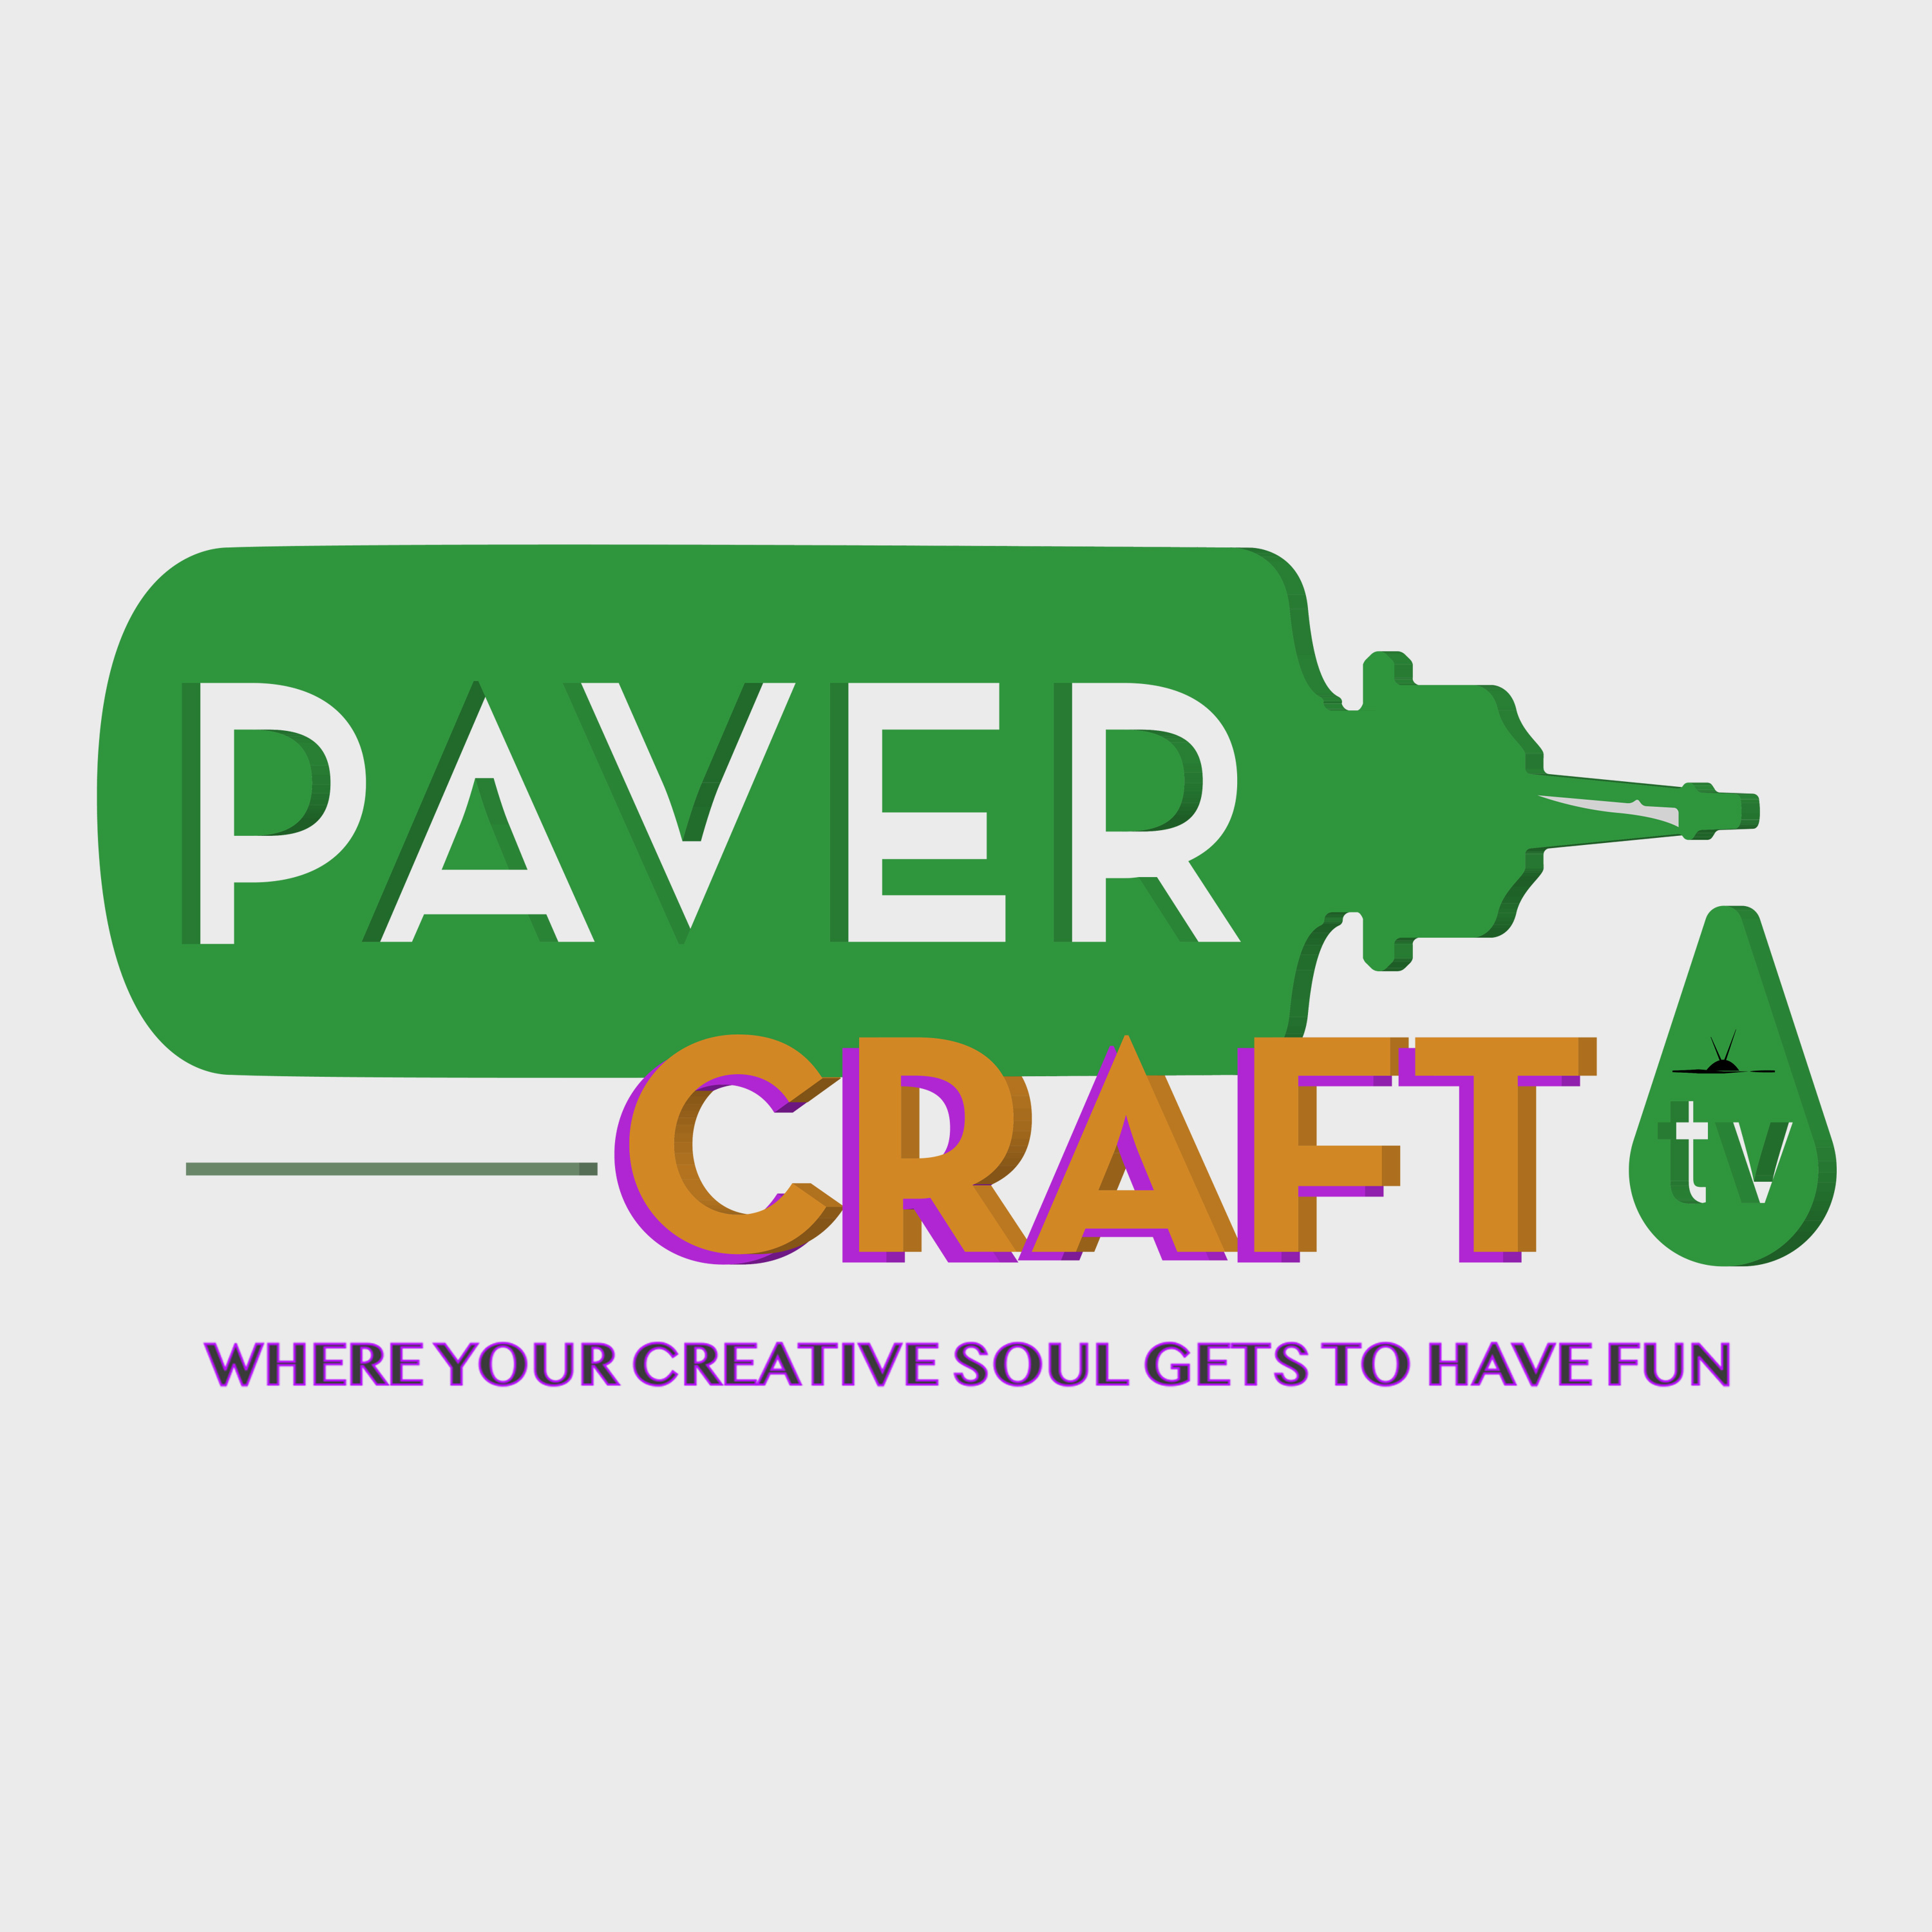 PavercraftTV - Where Your Creative Soul Gets to Have Fun!